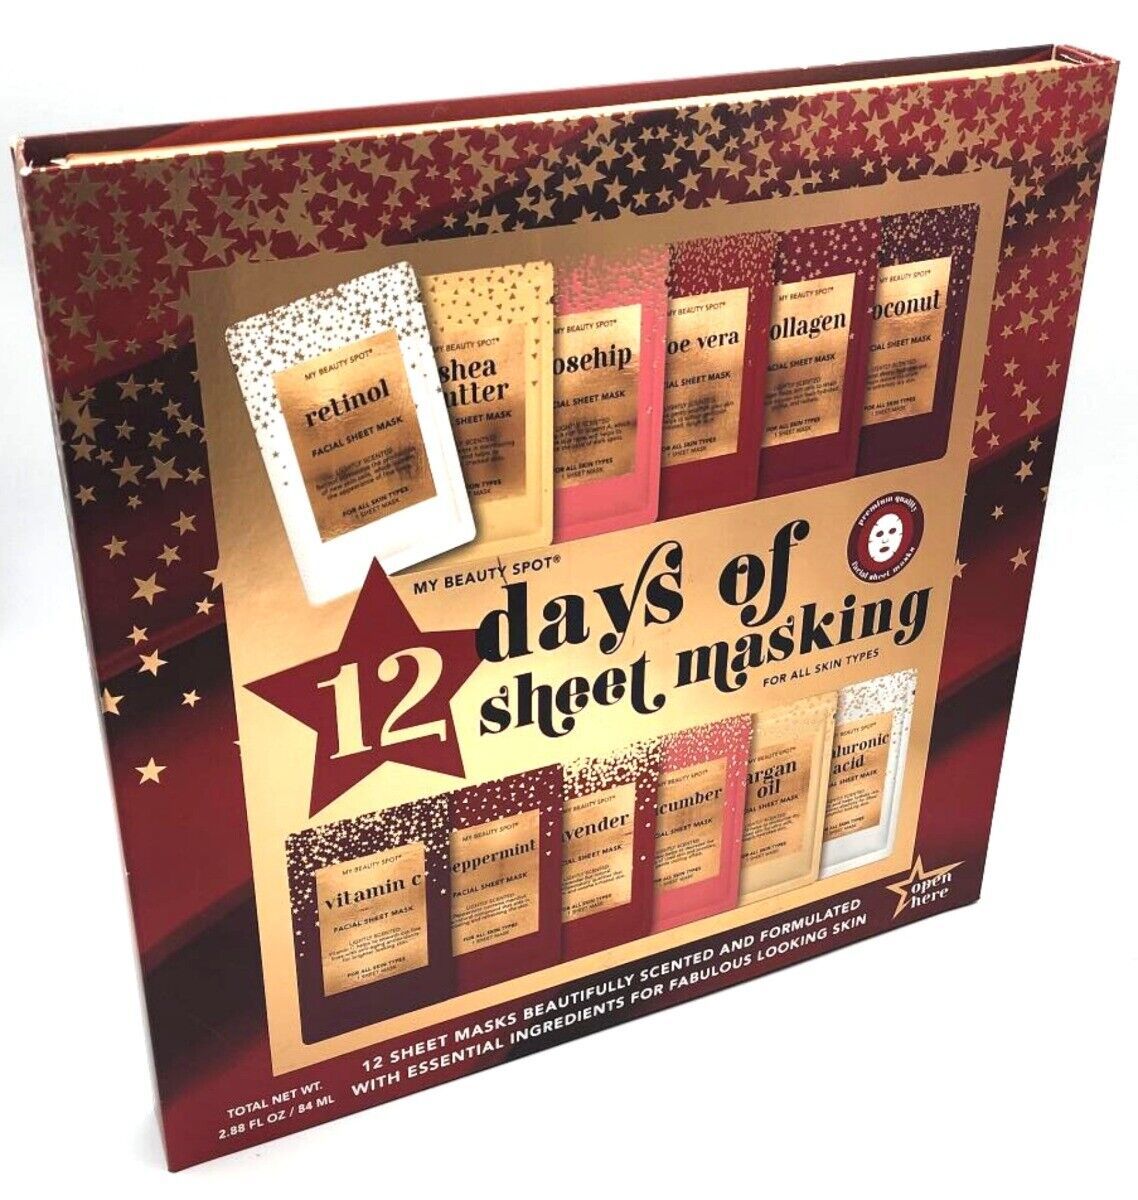 Primary image for My Beauty Spot 12 Days of Sheet Masking Scented Face Mask calendar set New Box